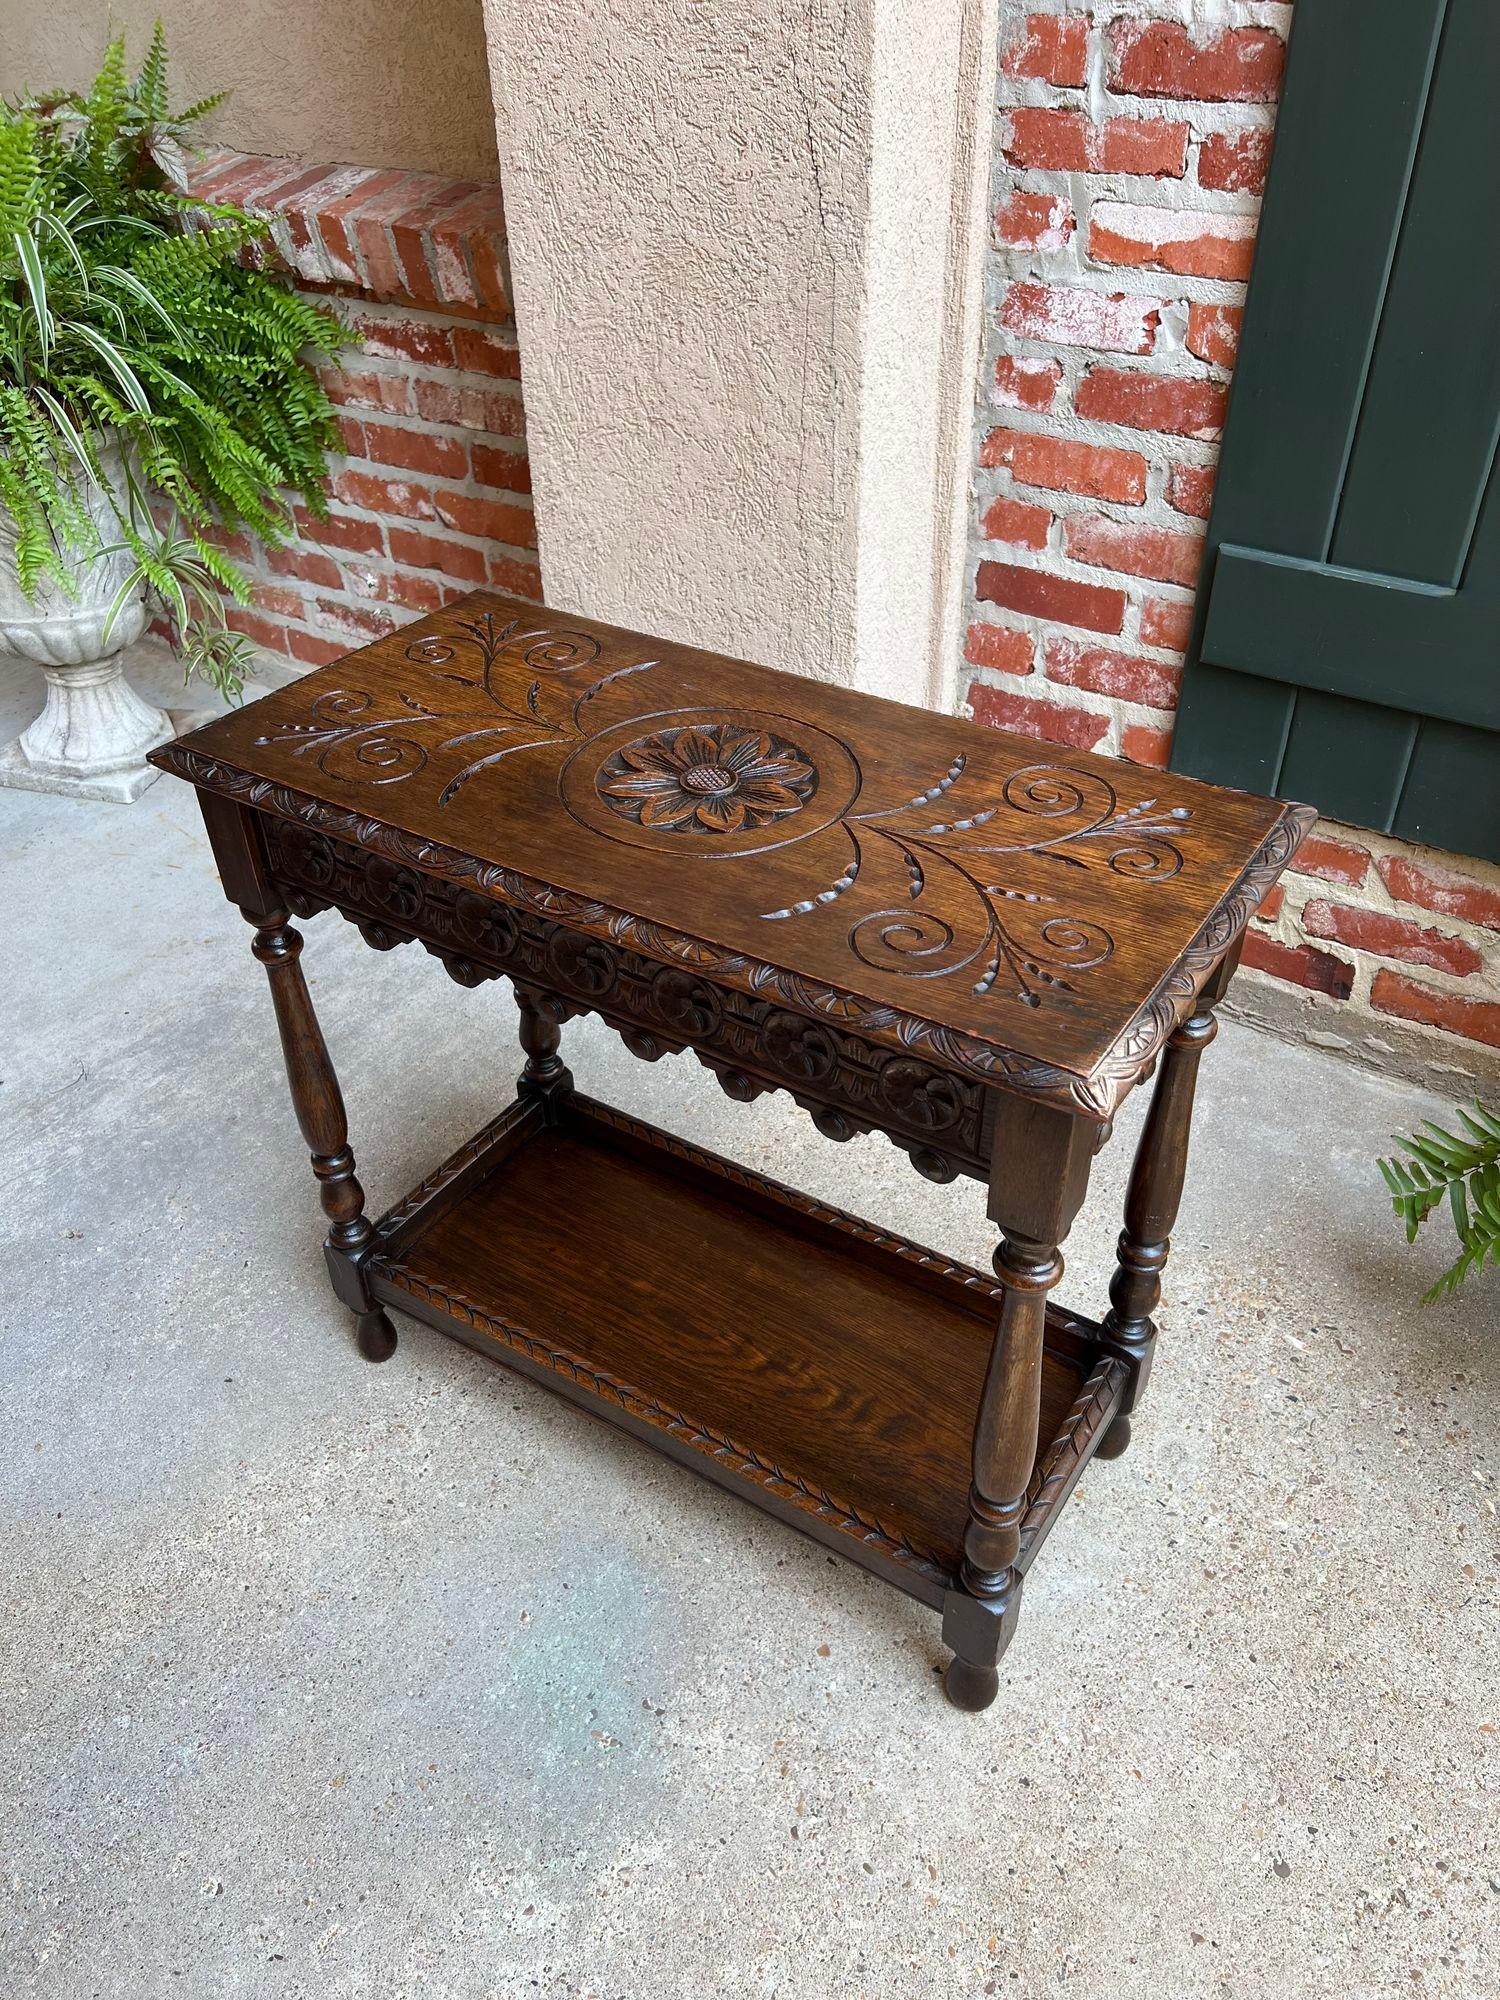 Early 20th Century Antique English Hall Sofa Table Petite Carved Oak Library Arts and Crafts style